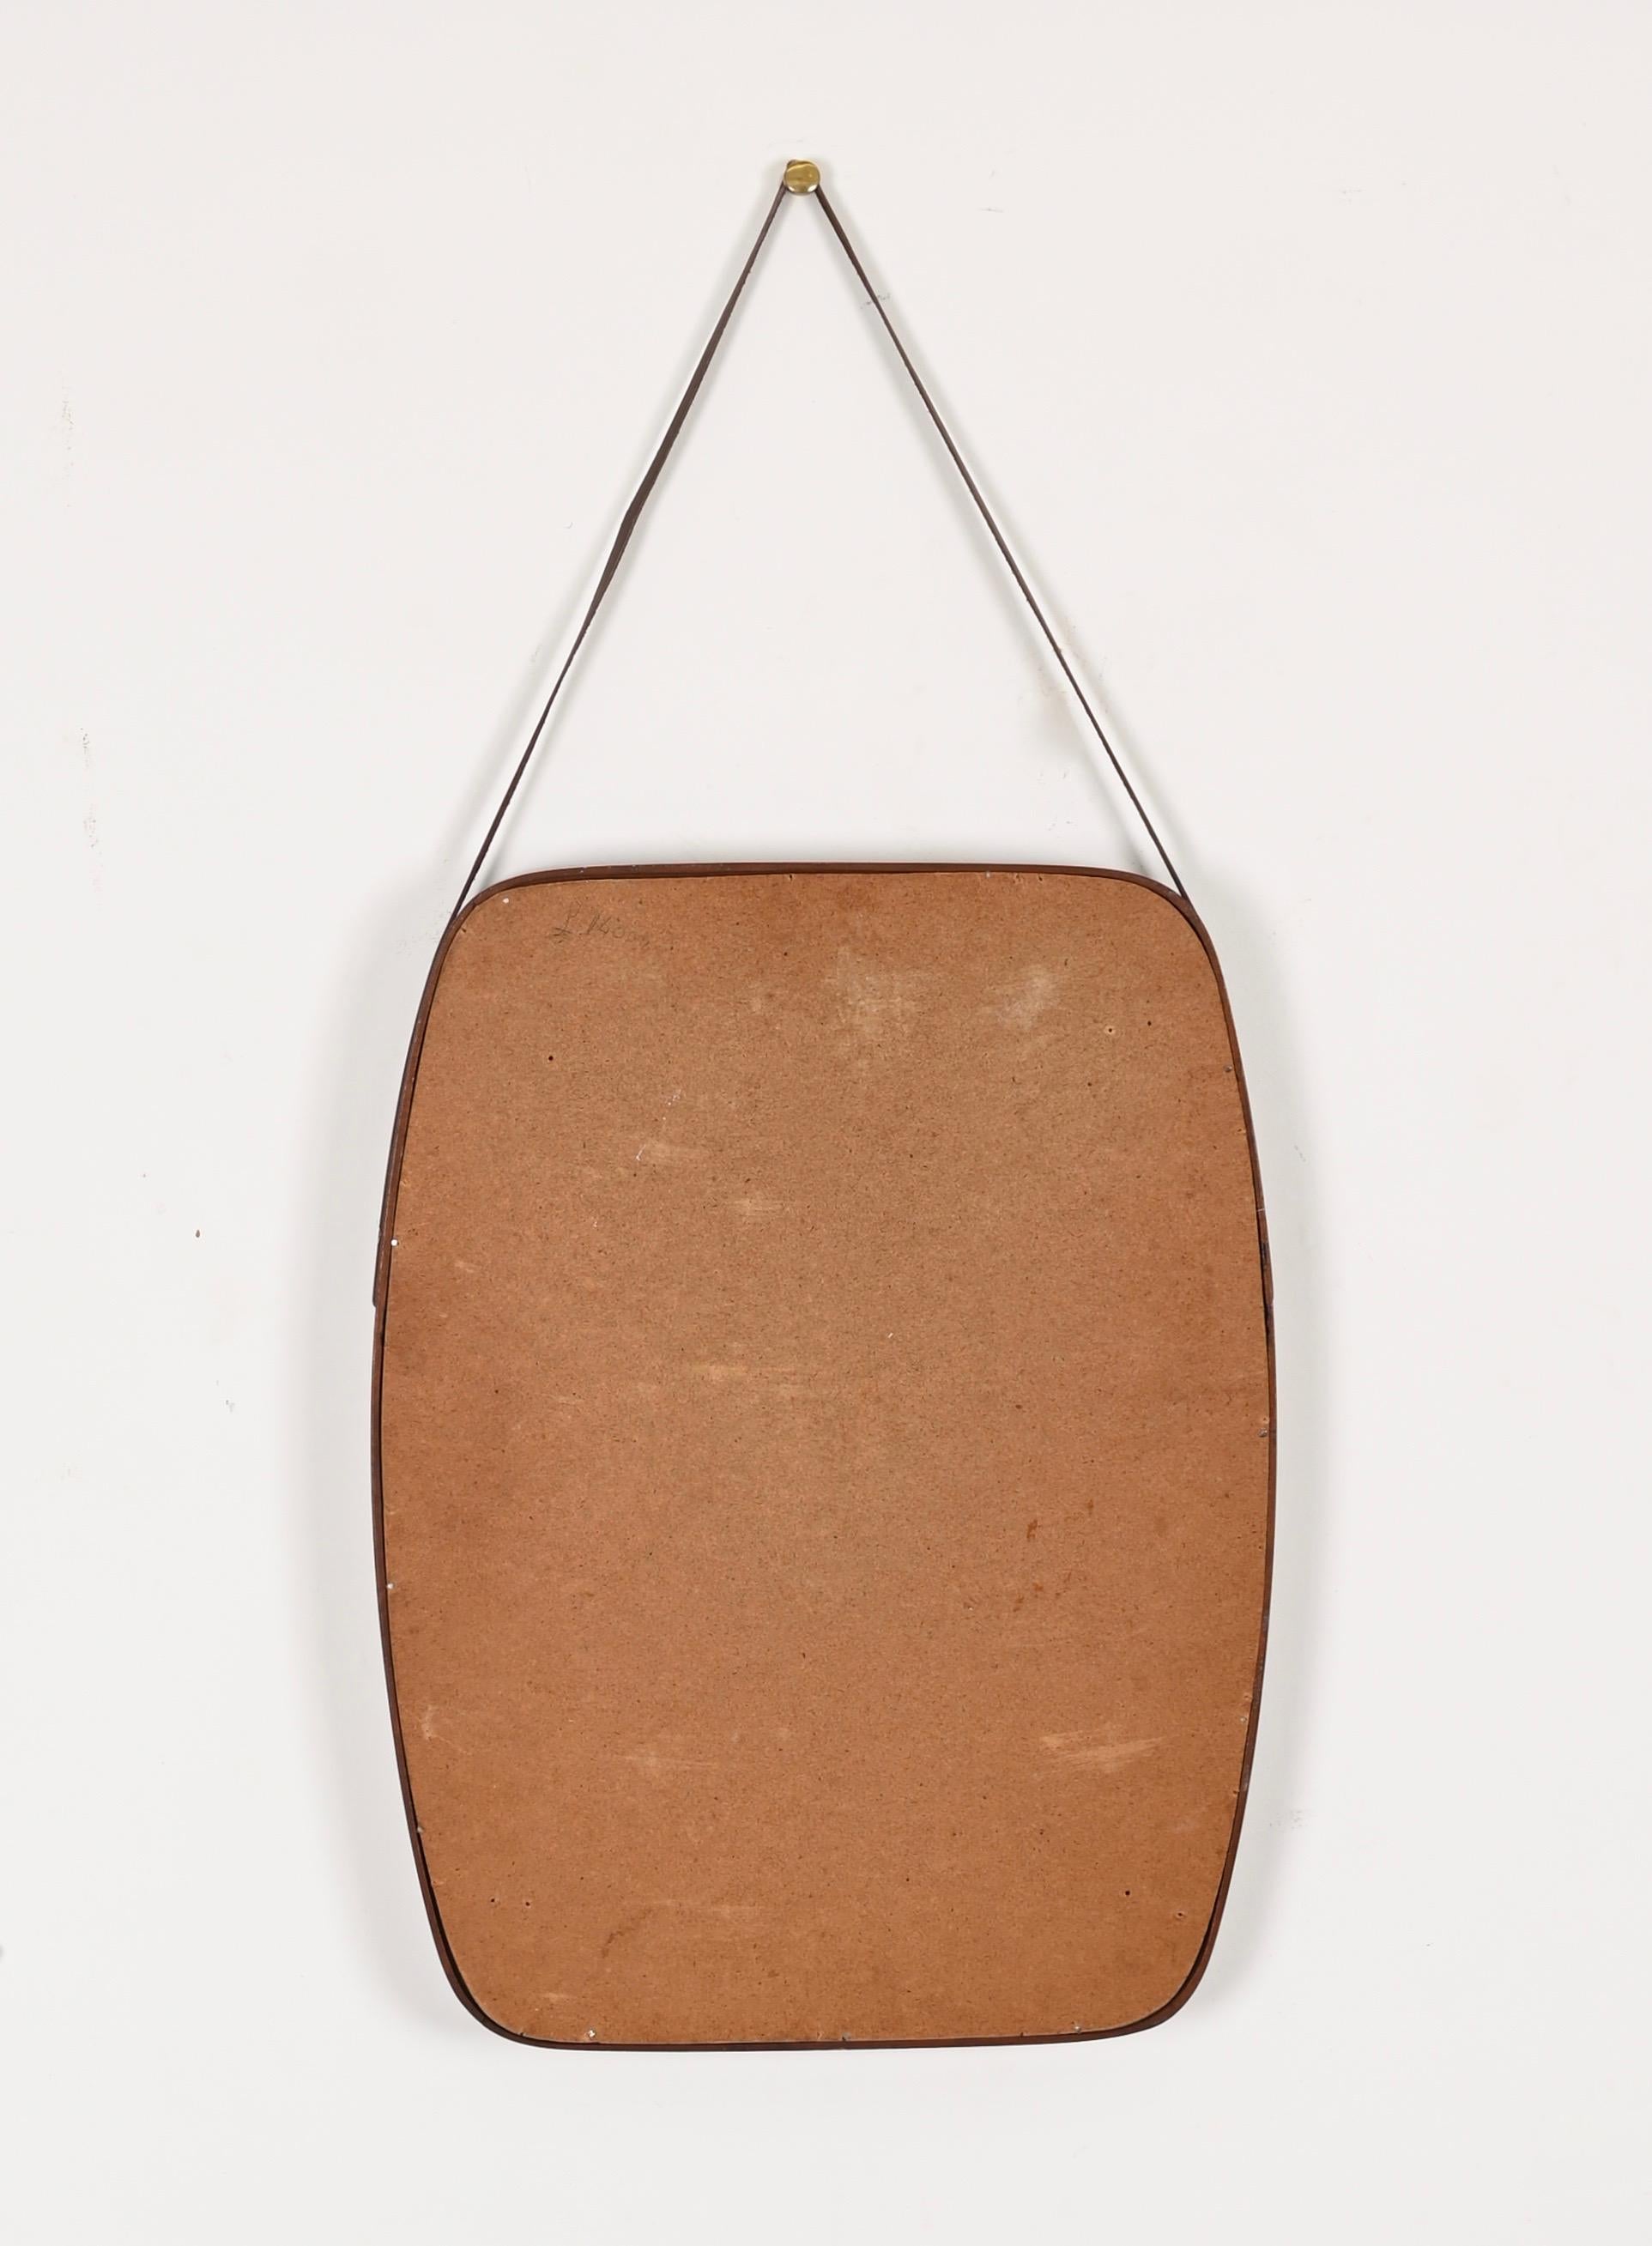 Mid-Century Rectangular Mirror in Teak, Leather by Campo & Graffi, Italy 1960s For Sale 1